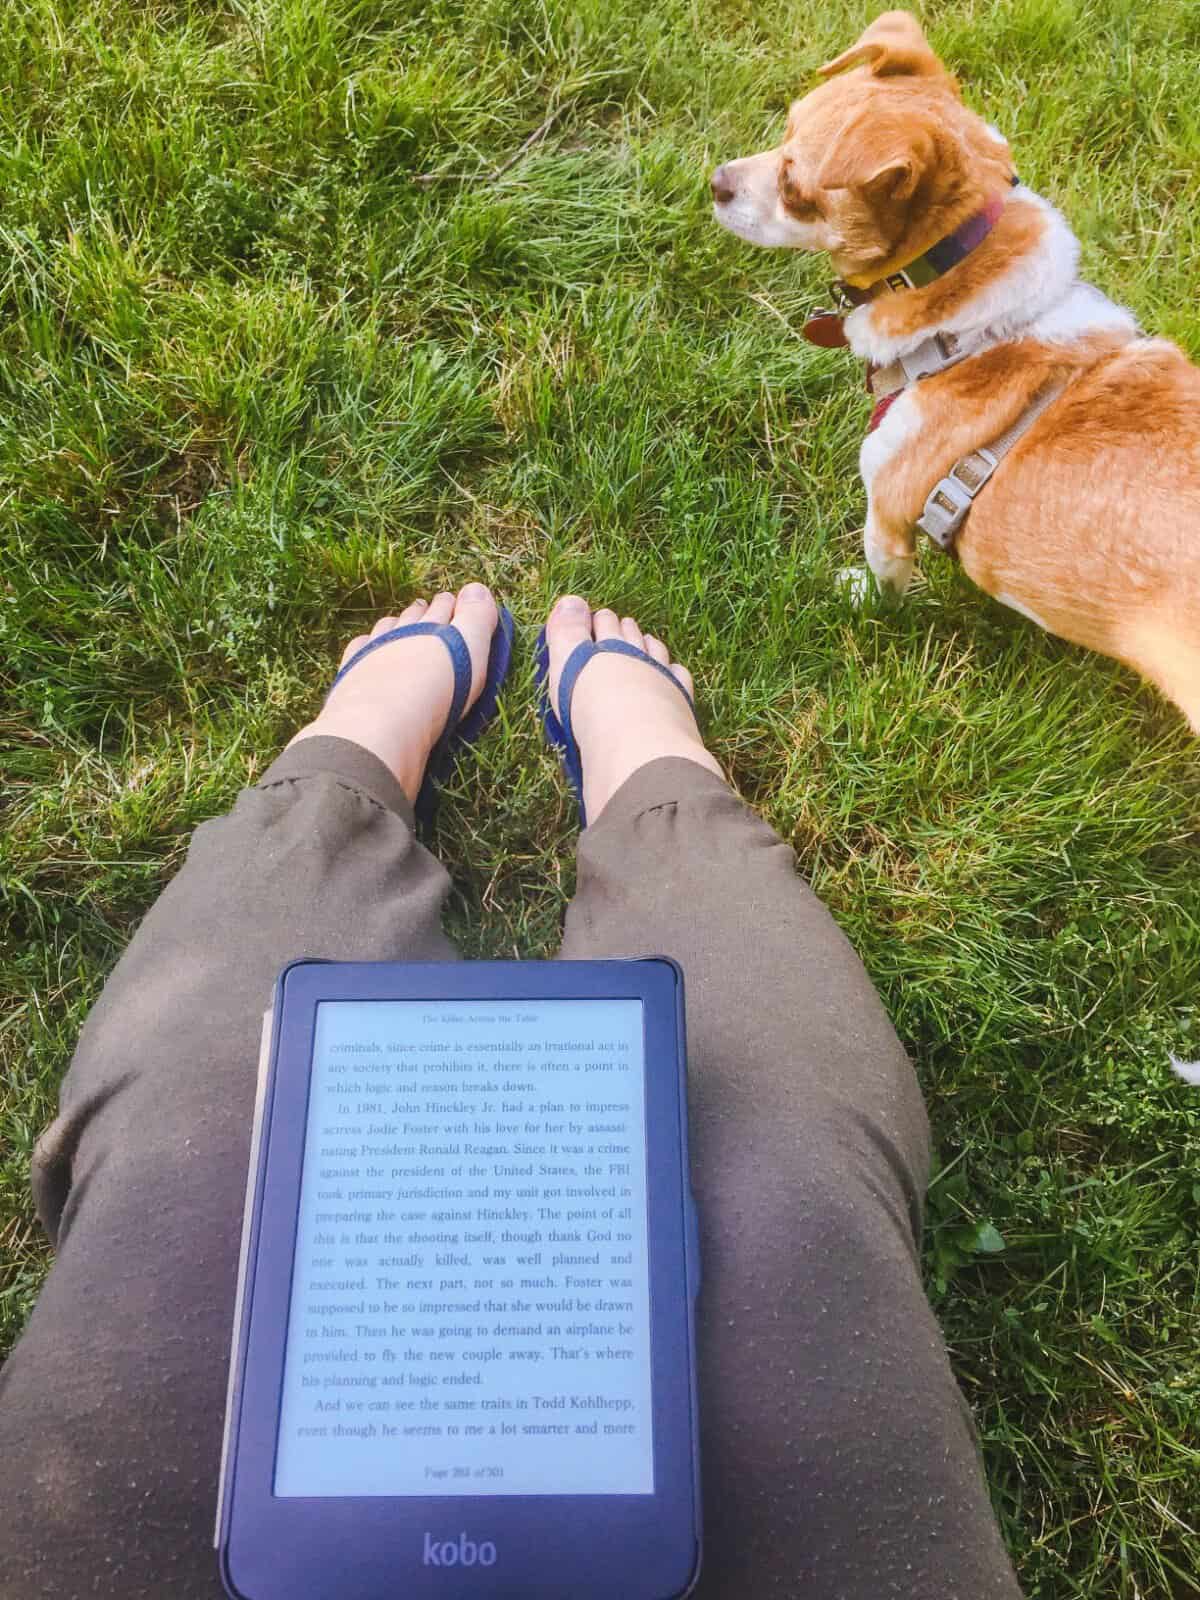 Shot of Riana's legs with an ebook in her lap and her dog Ellie on the grass in front of her